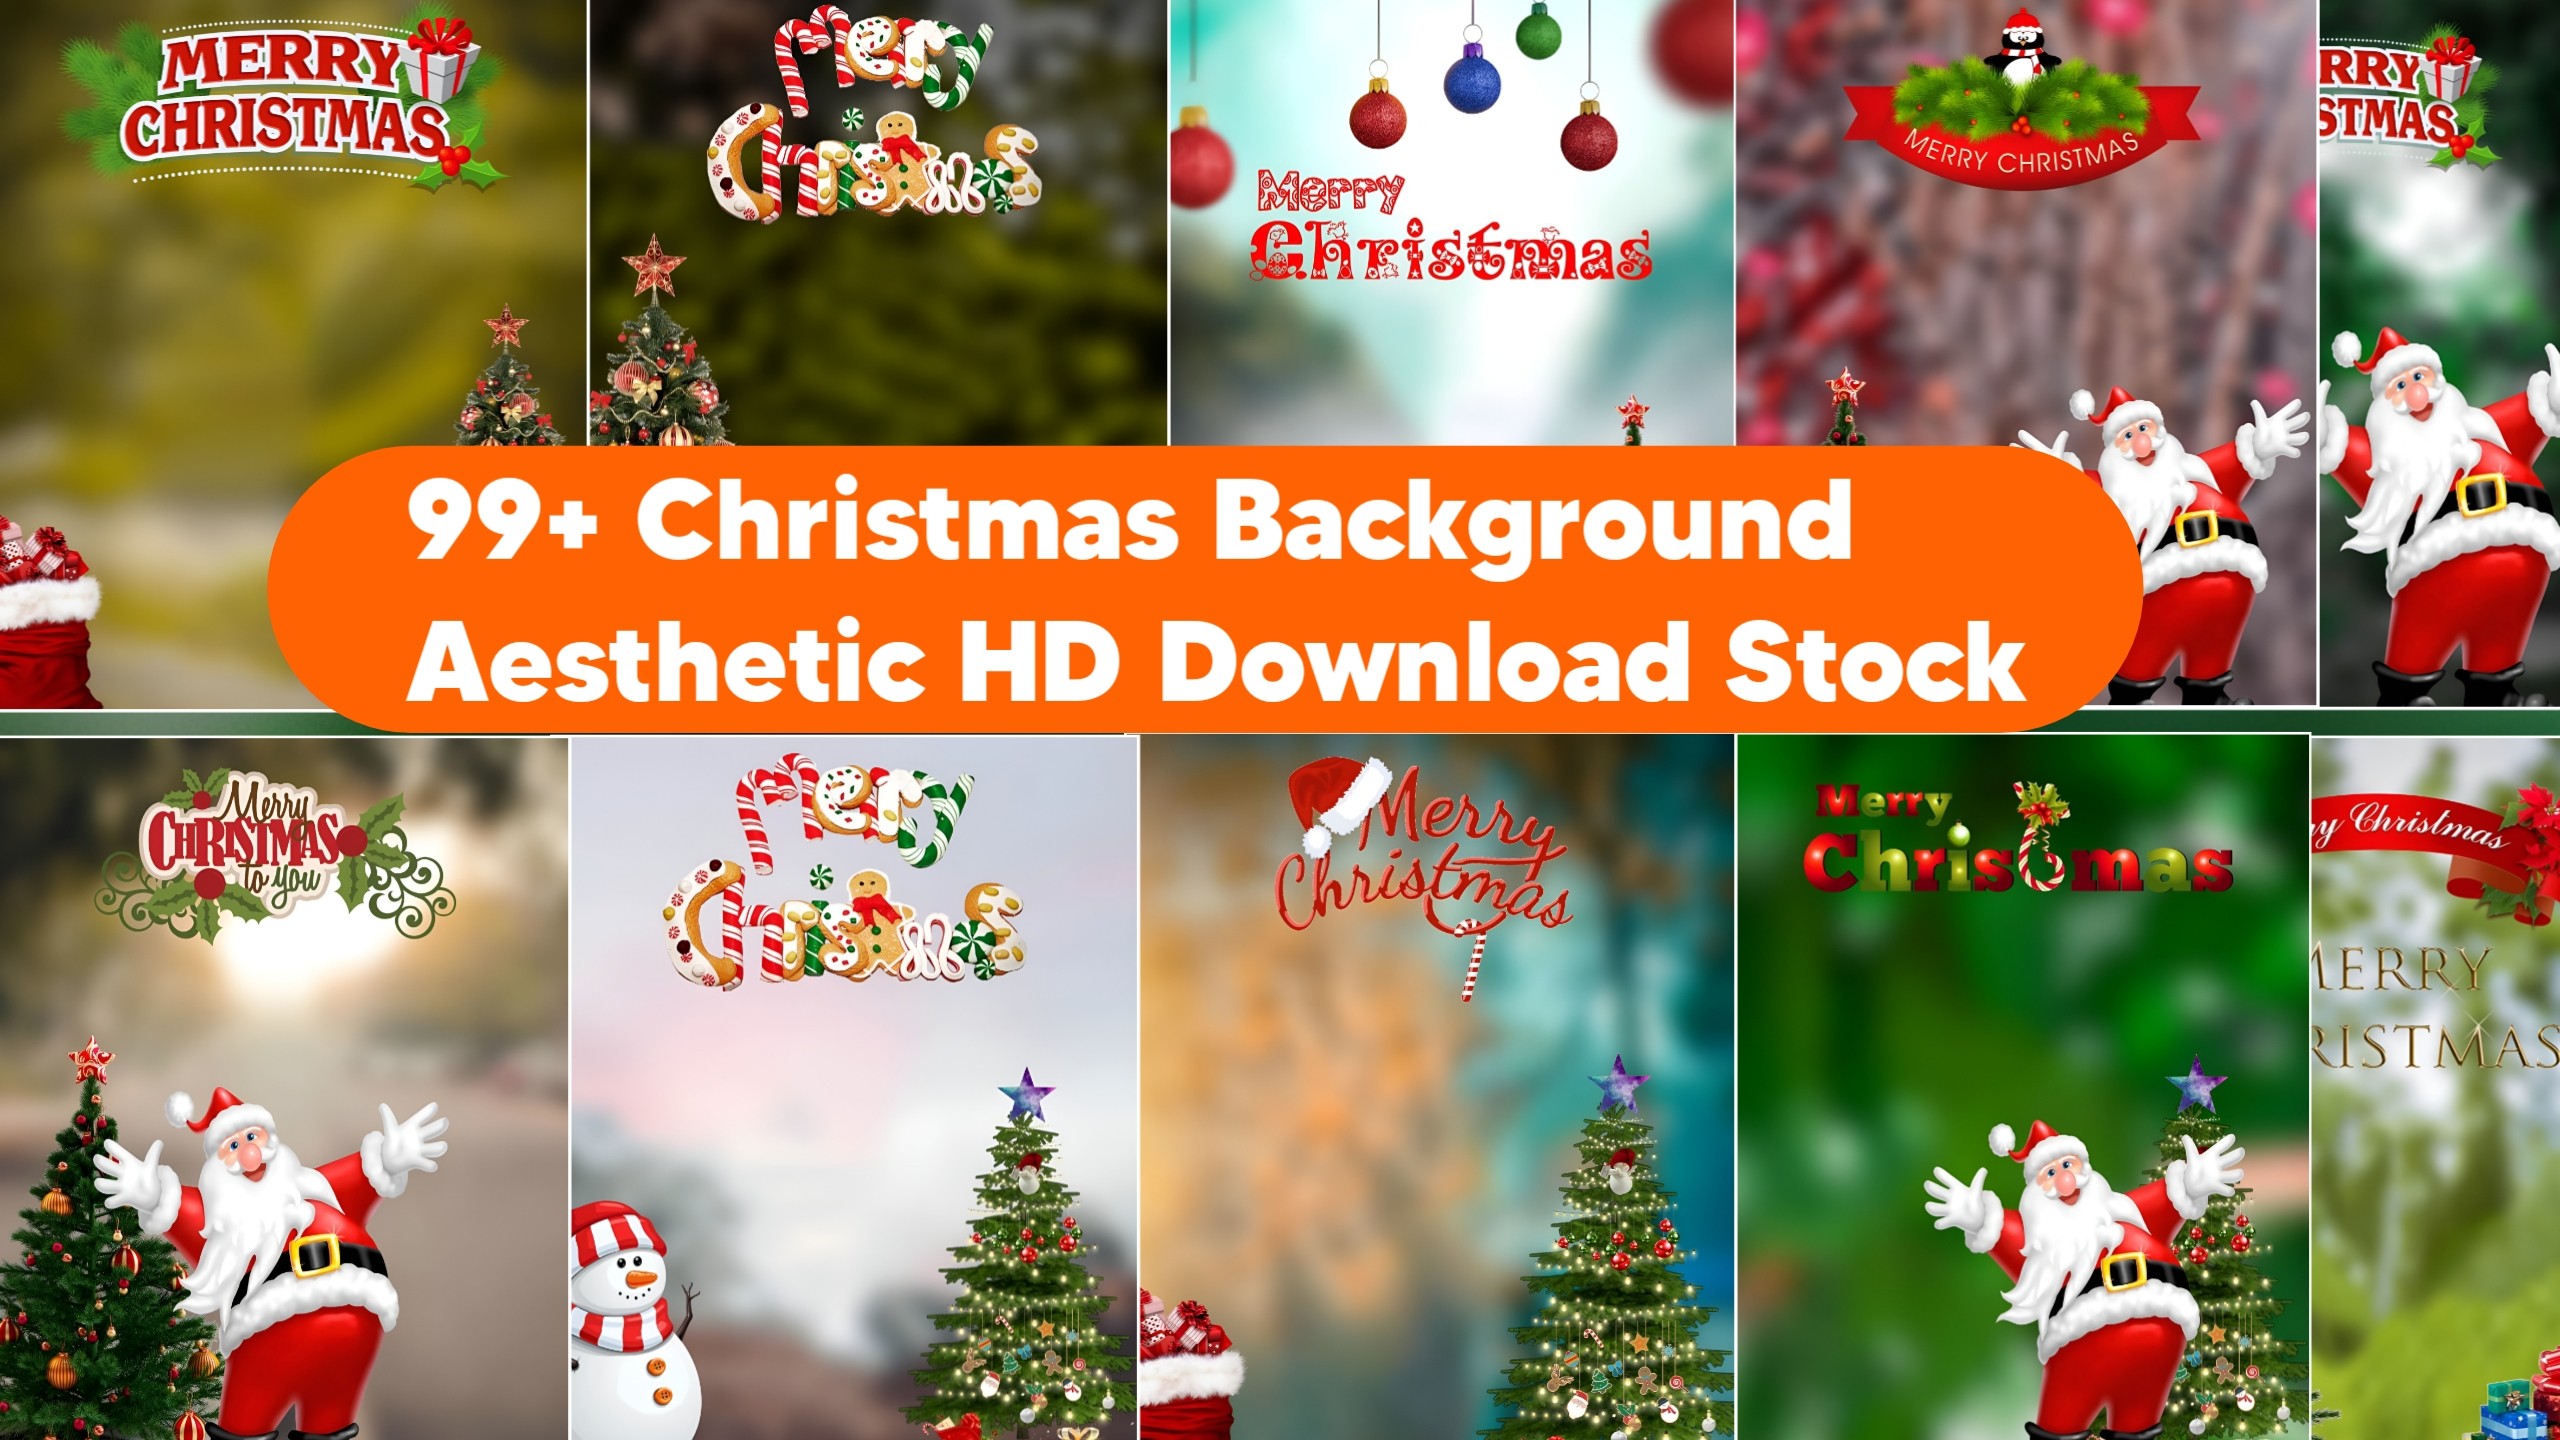 99+ Christmas Background Aesthetic HD Download Stock